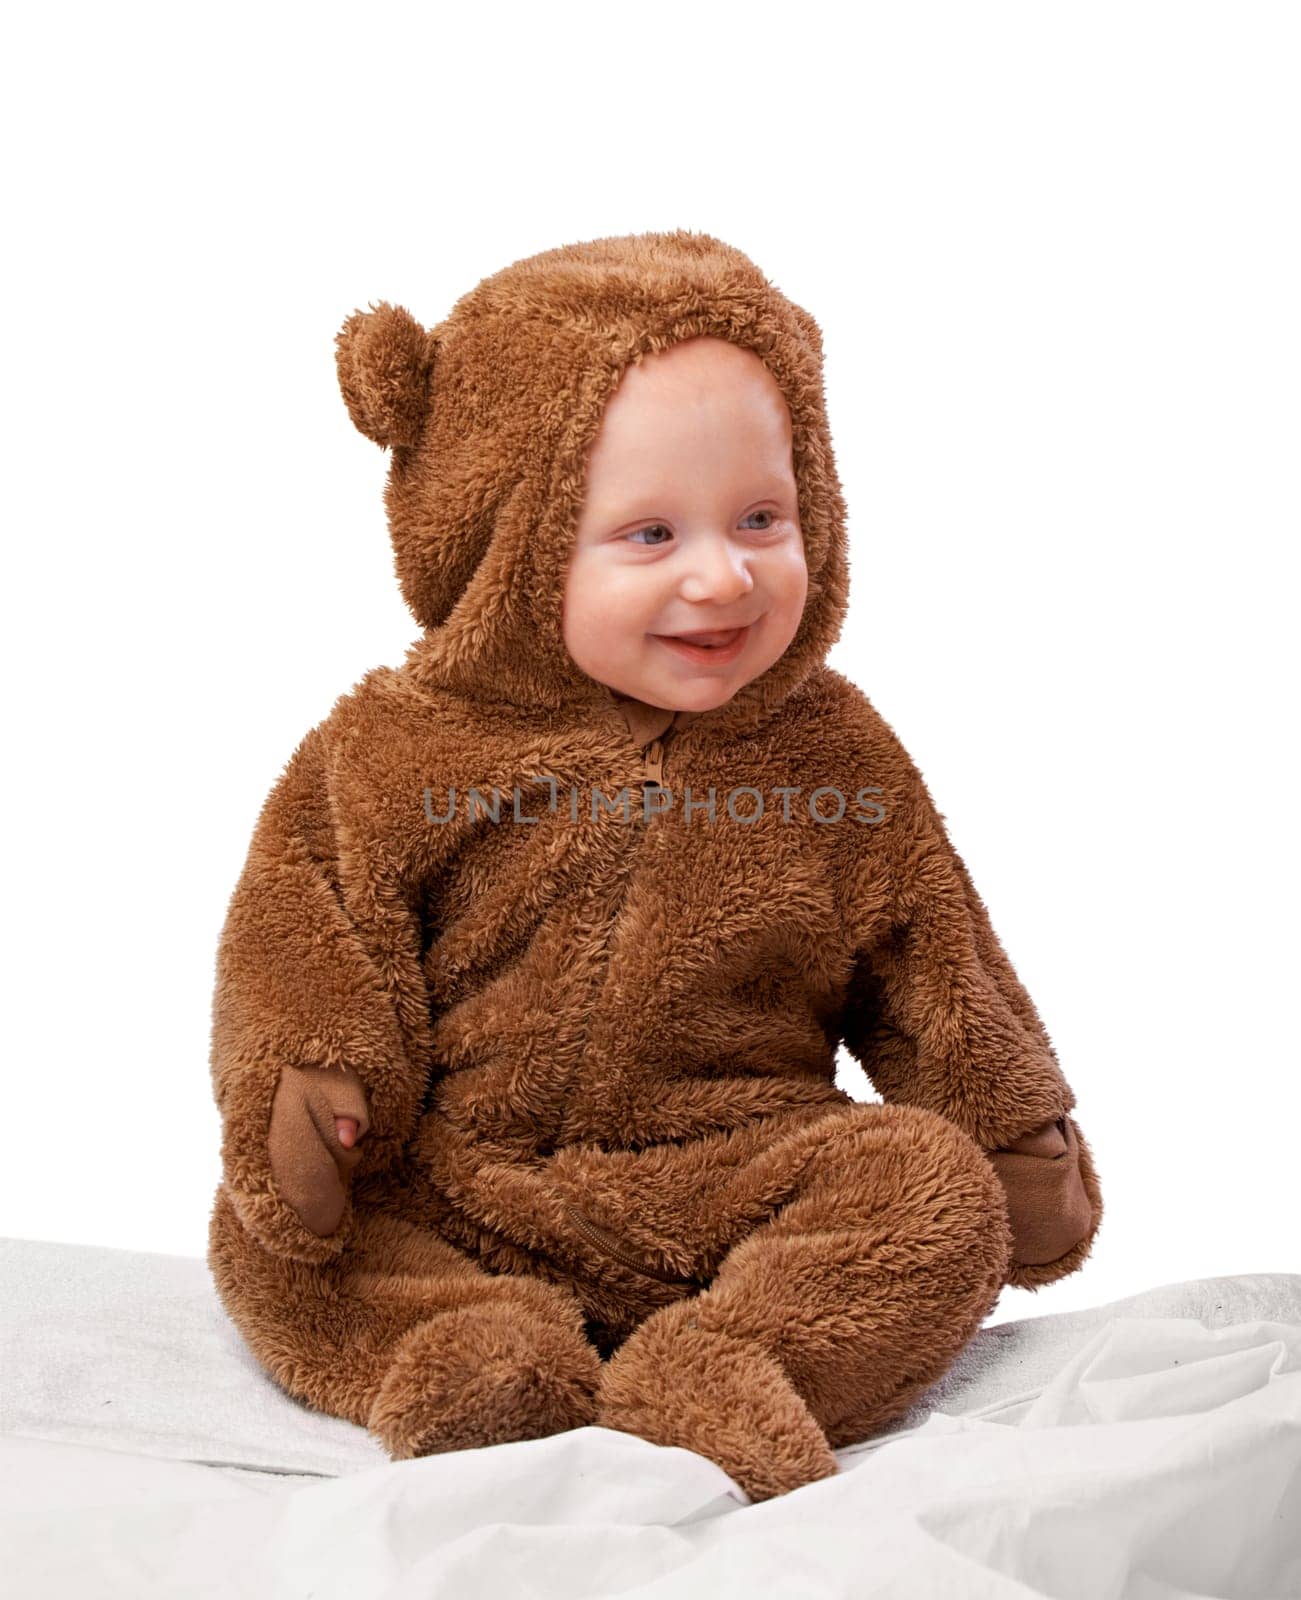 Studio, baby and onesie with costume, bear and toddler with joy and fun. Child, newborn and happiness with adorable, comfort and dressed up infant for development isolated on white background.